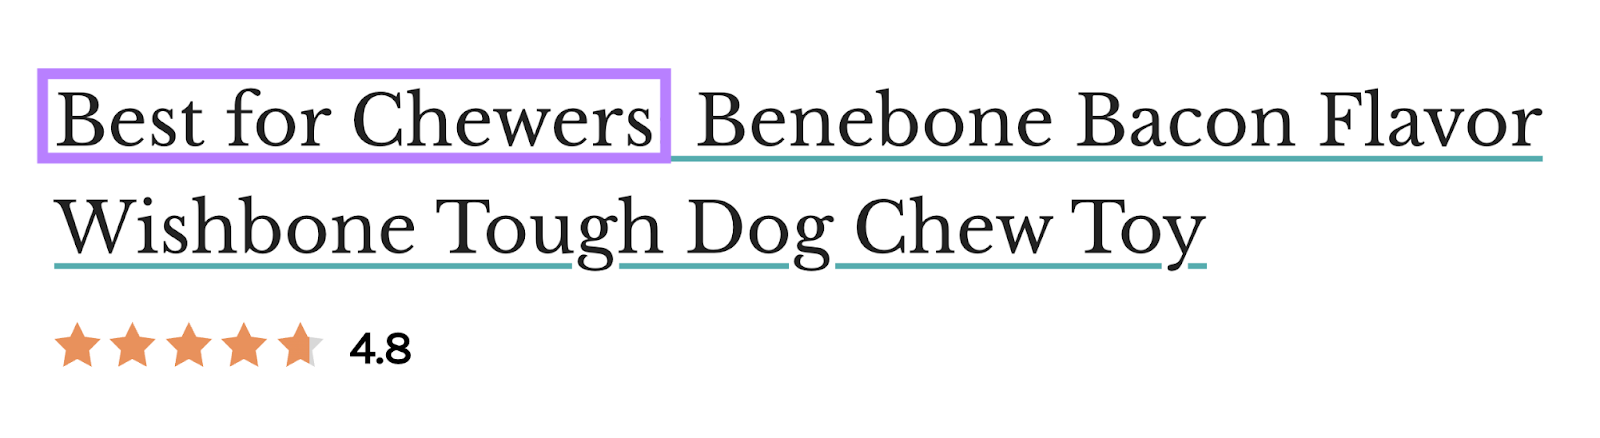 "Best of Chewers" Benebone Bacon Flavor Wishbone Tough Dog Toy" title with "Best for Chewers" highlighted